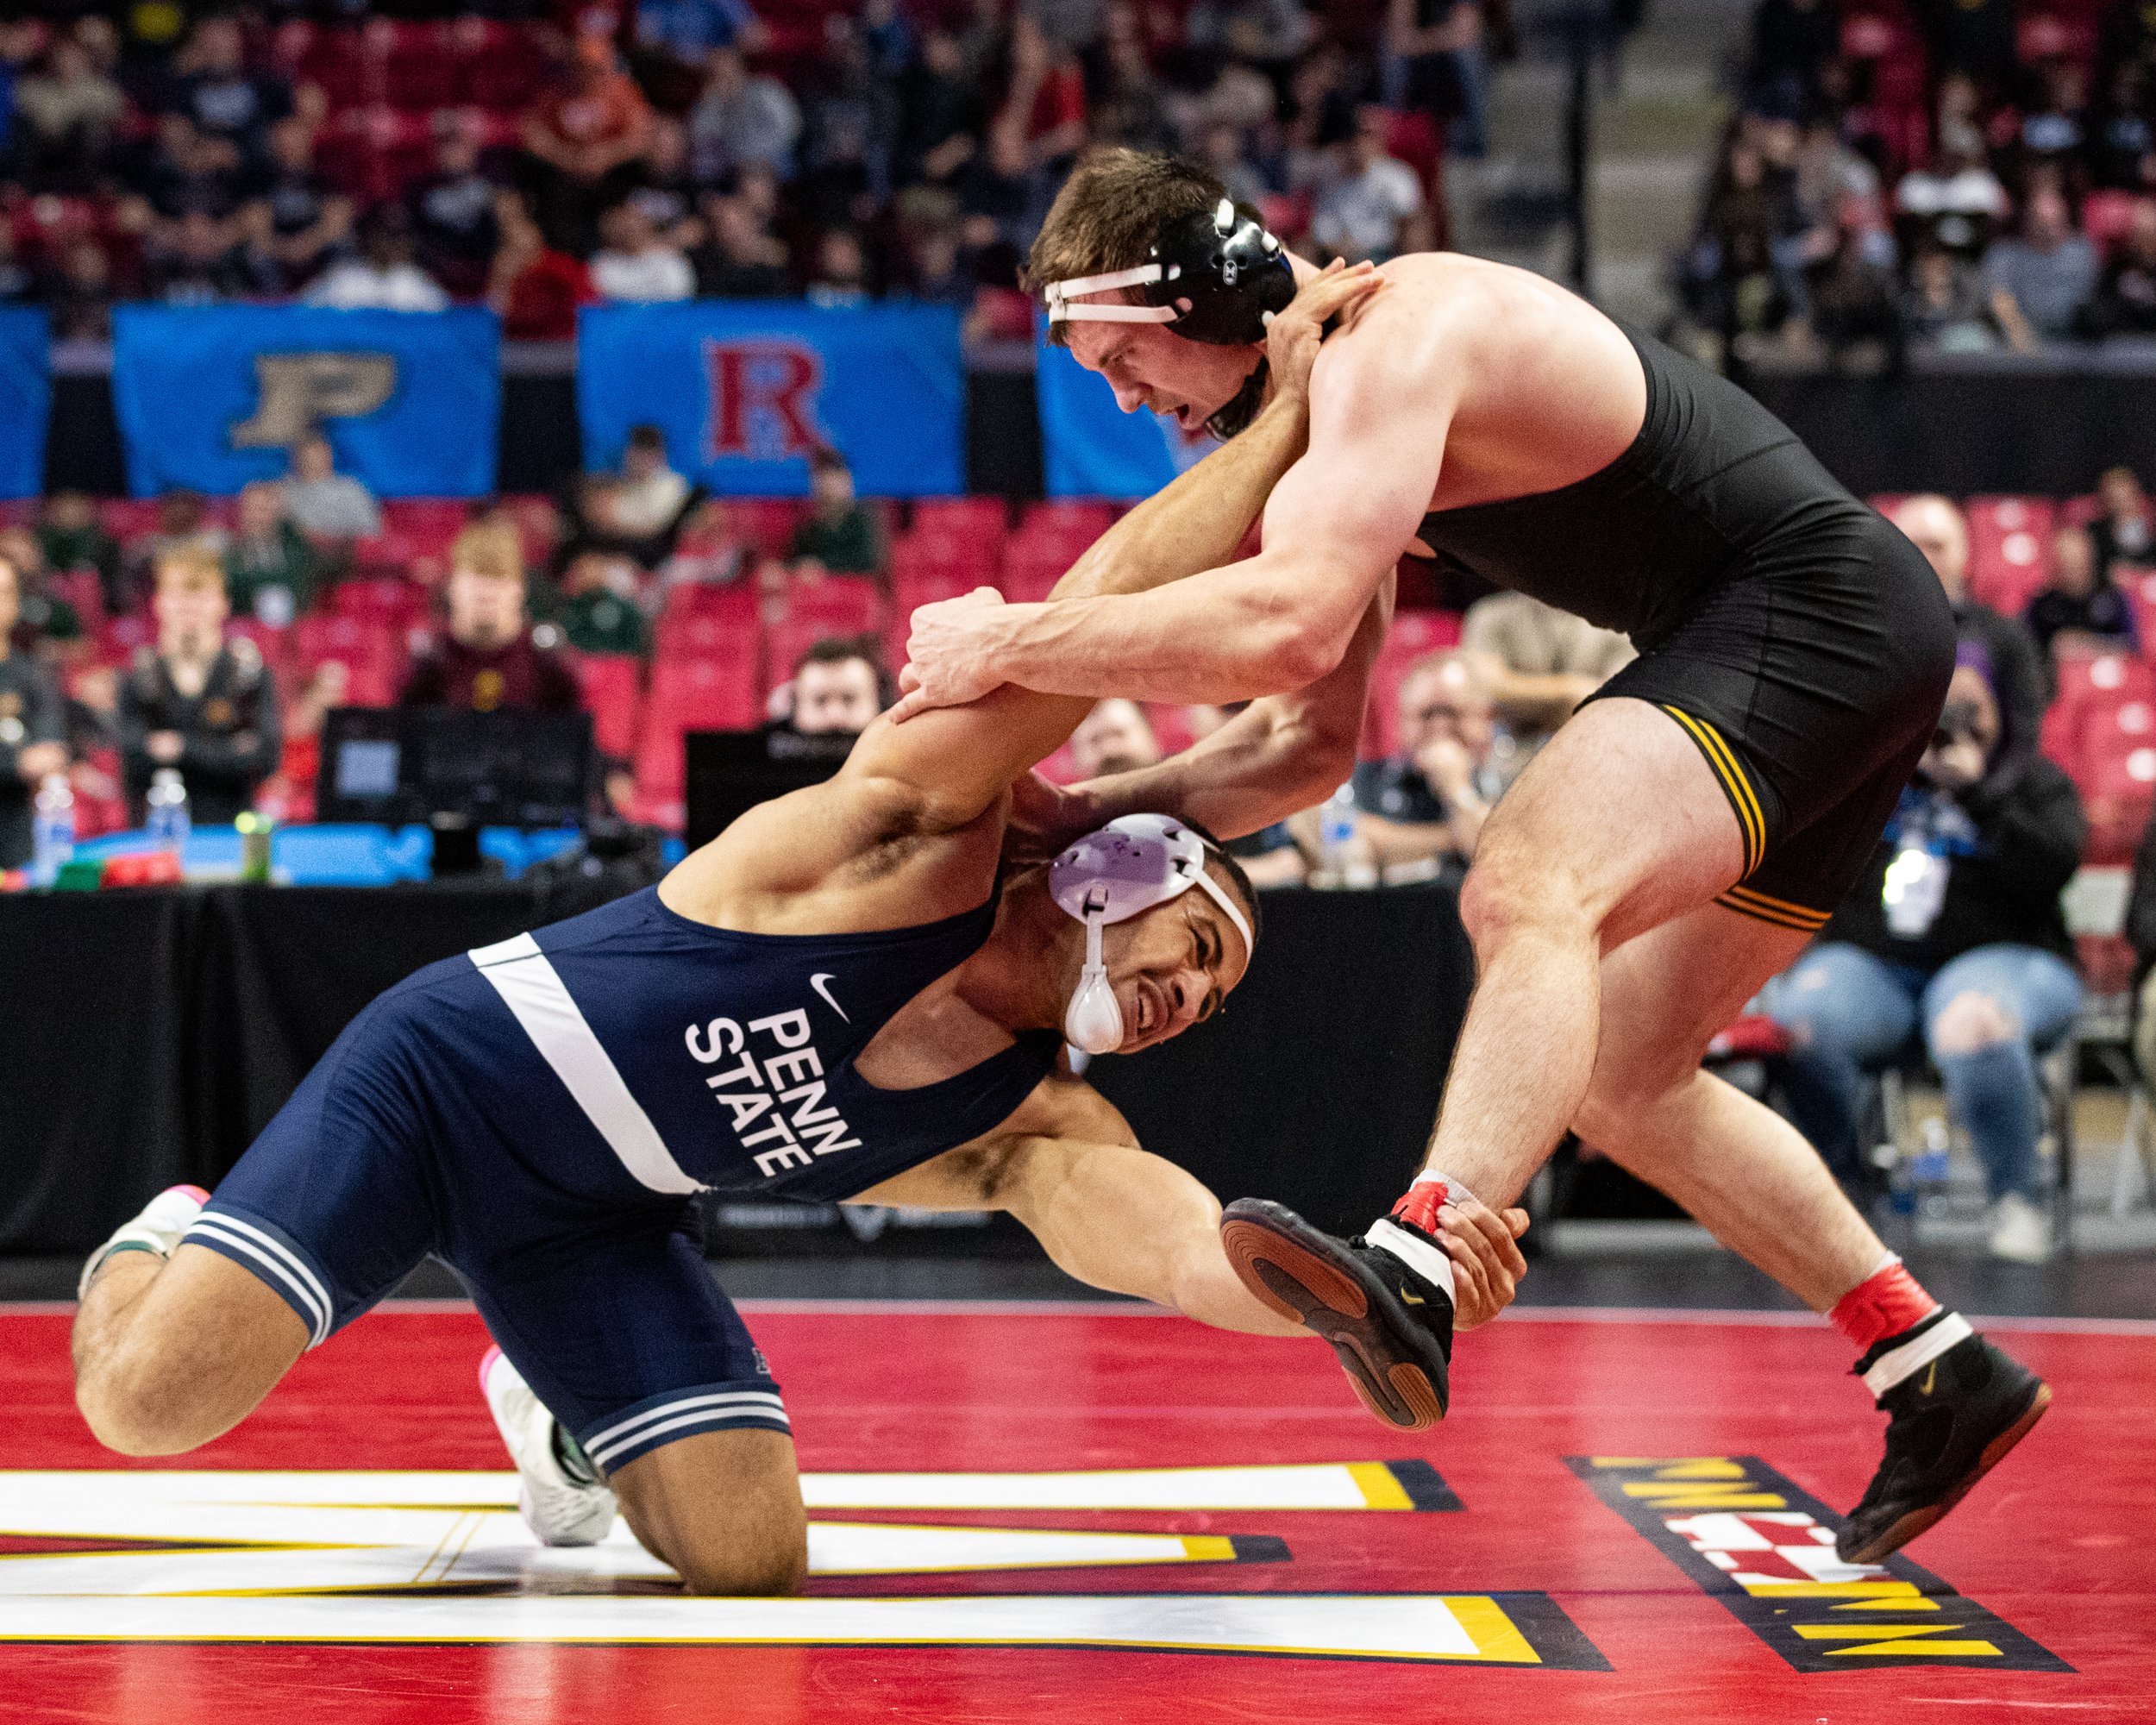  Iowa wrestler Zach Glazier grapples with Penn State’s Aaron Brooks in a 197-lb championship match during the Big Ten Wrestling Championships at the Xfinity Center in College Park, Maryland on Sunday, March 10, 2023. Glazier lost via Technical Fall a